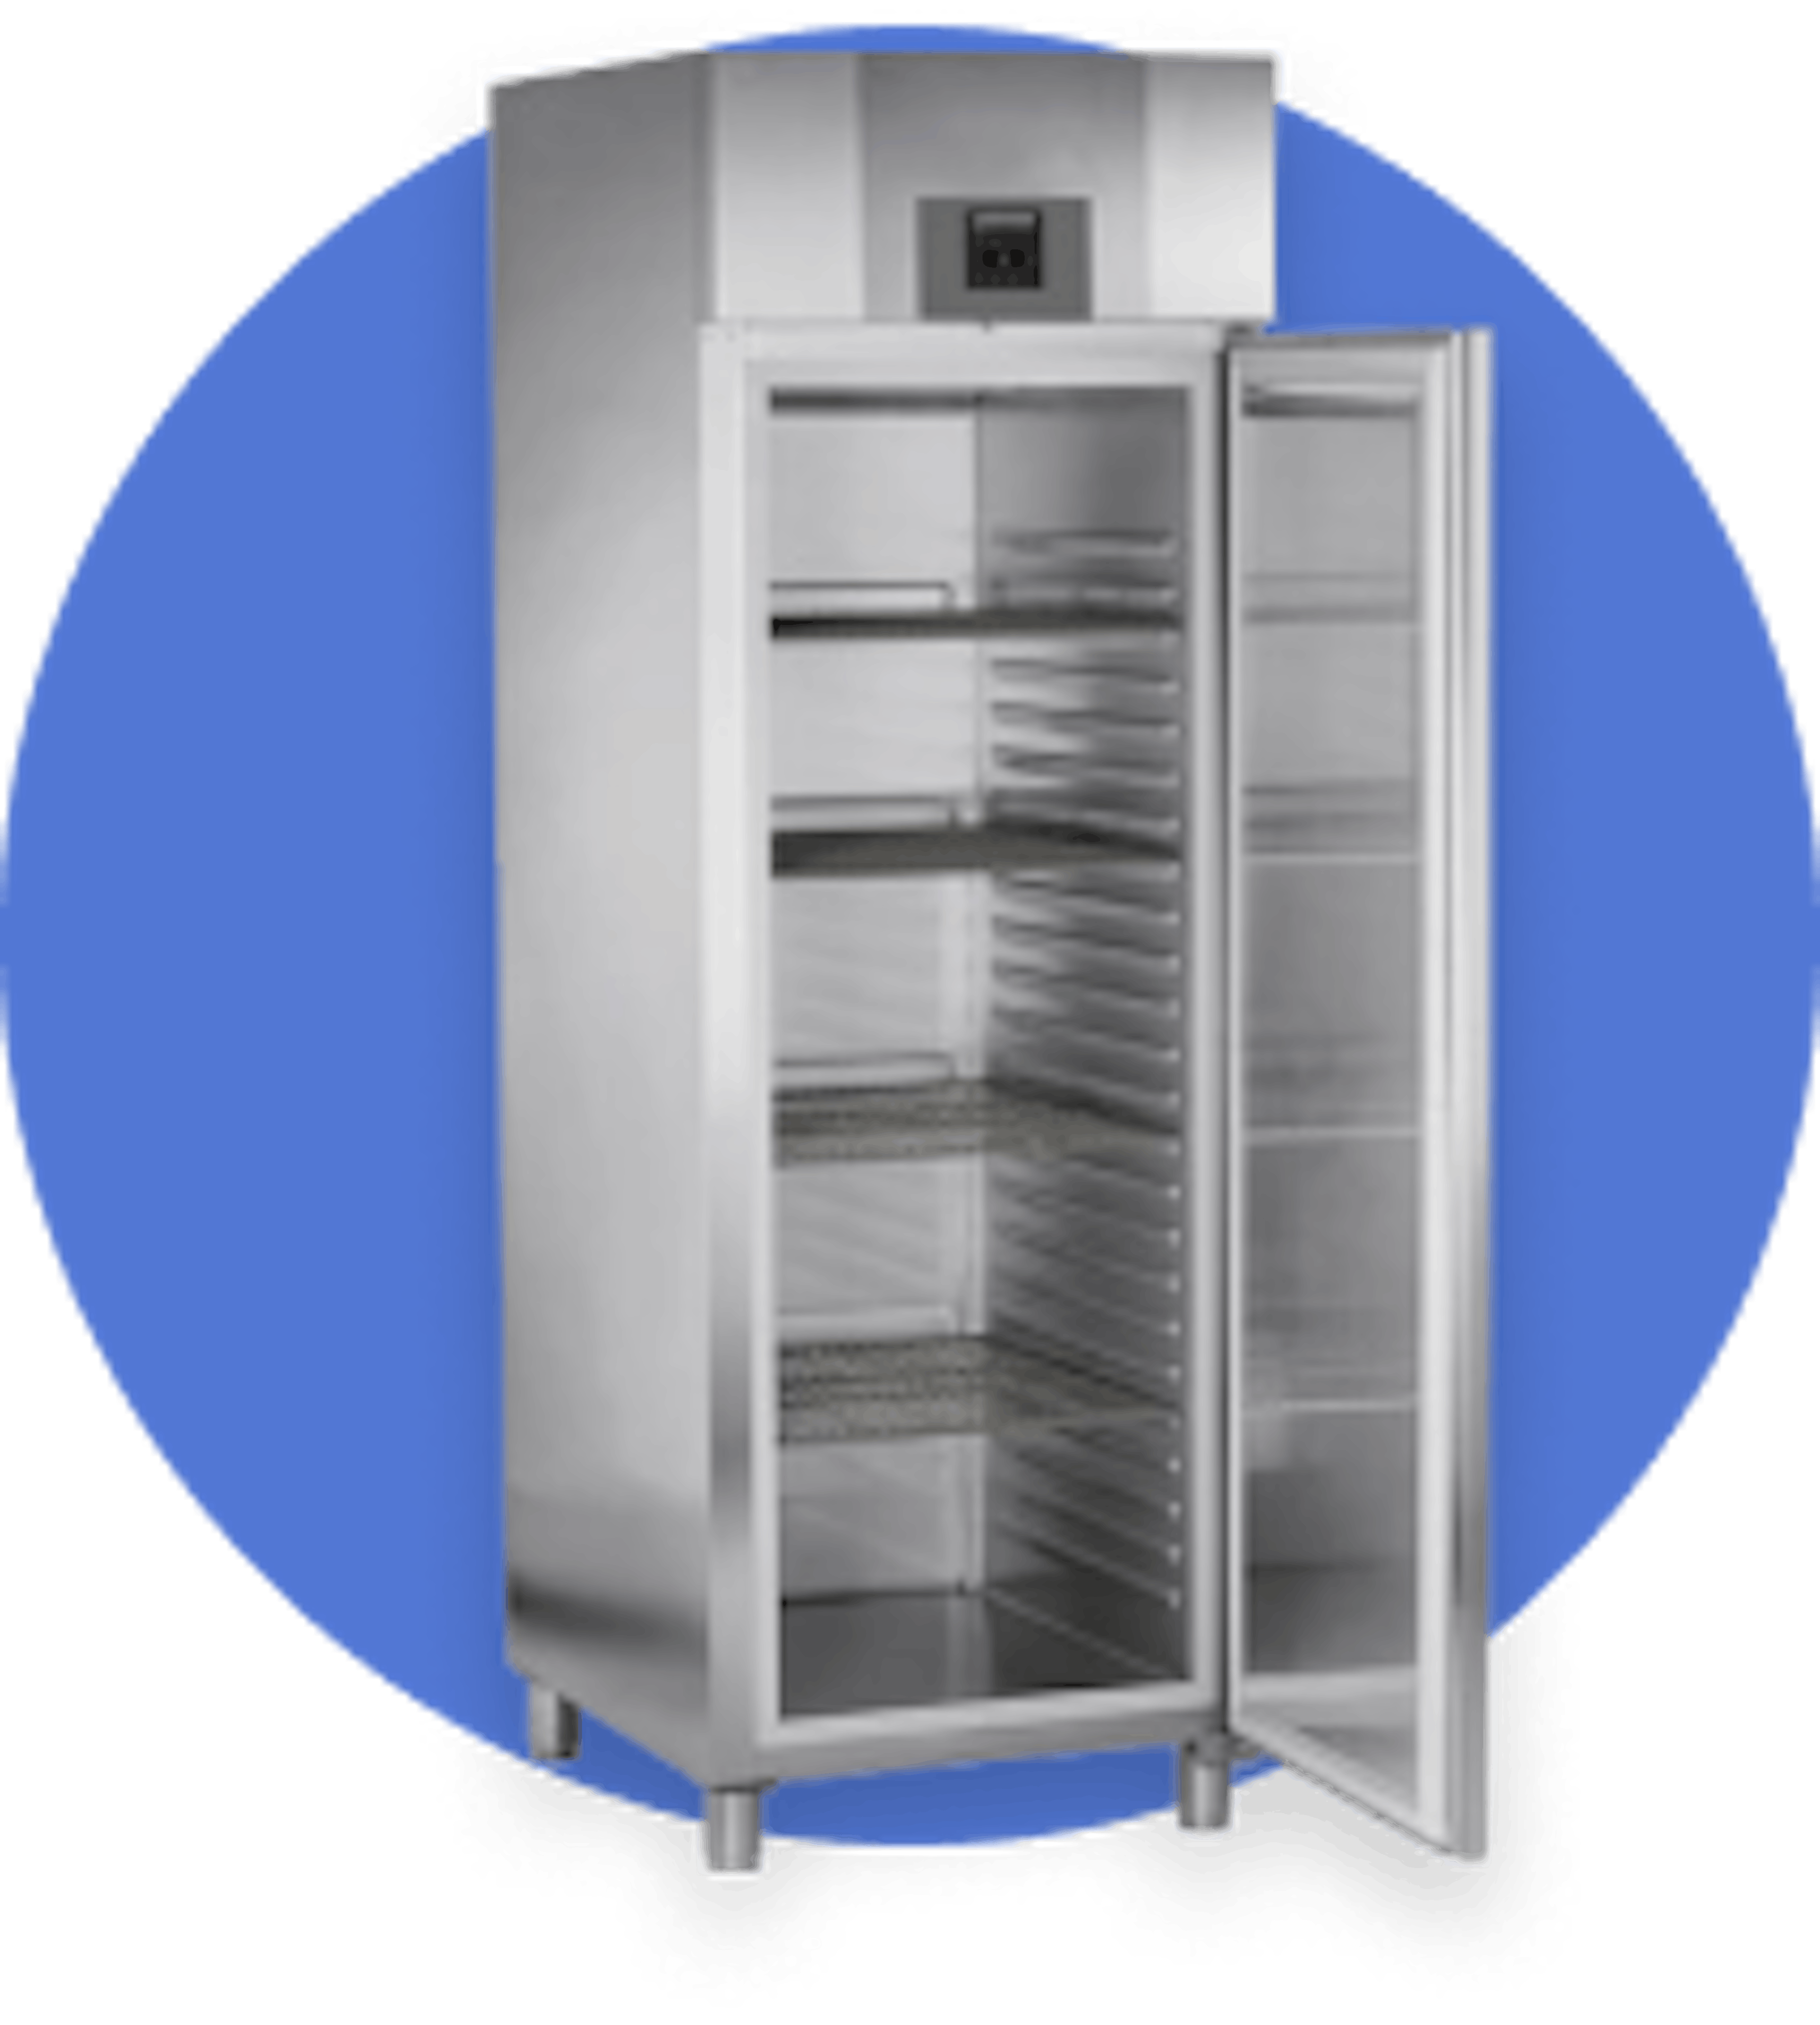 Icon with commercial refrigerator, on blue background